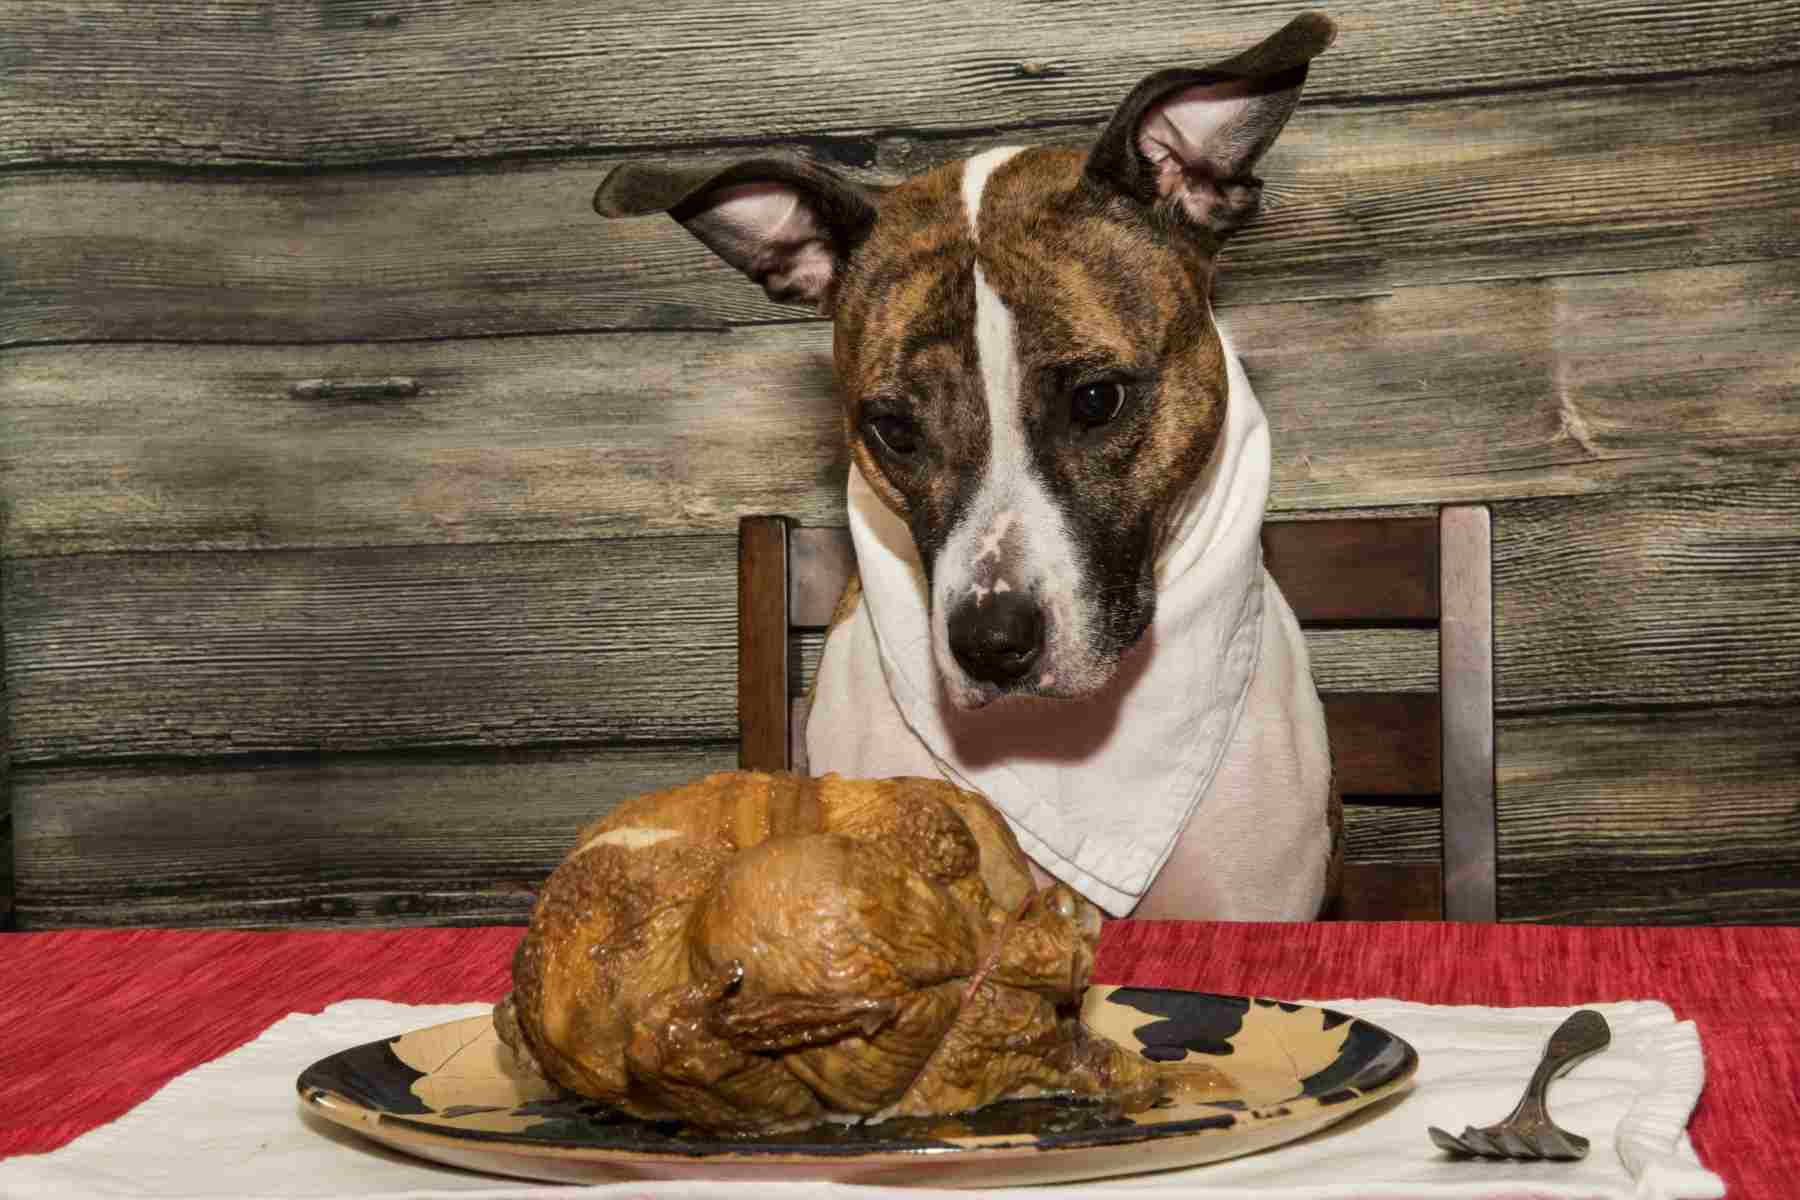 Dog sitting in front of turkey at table